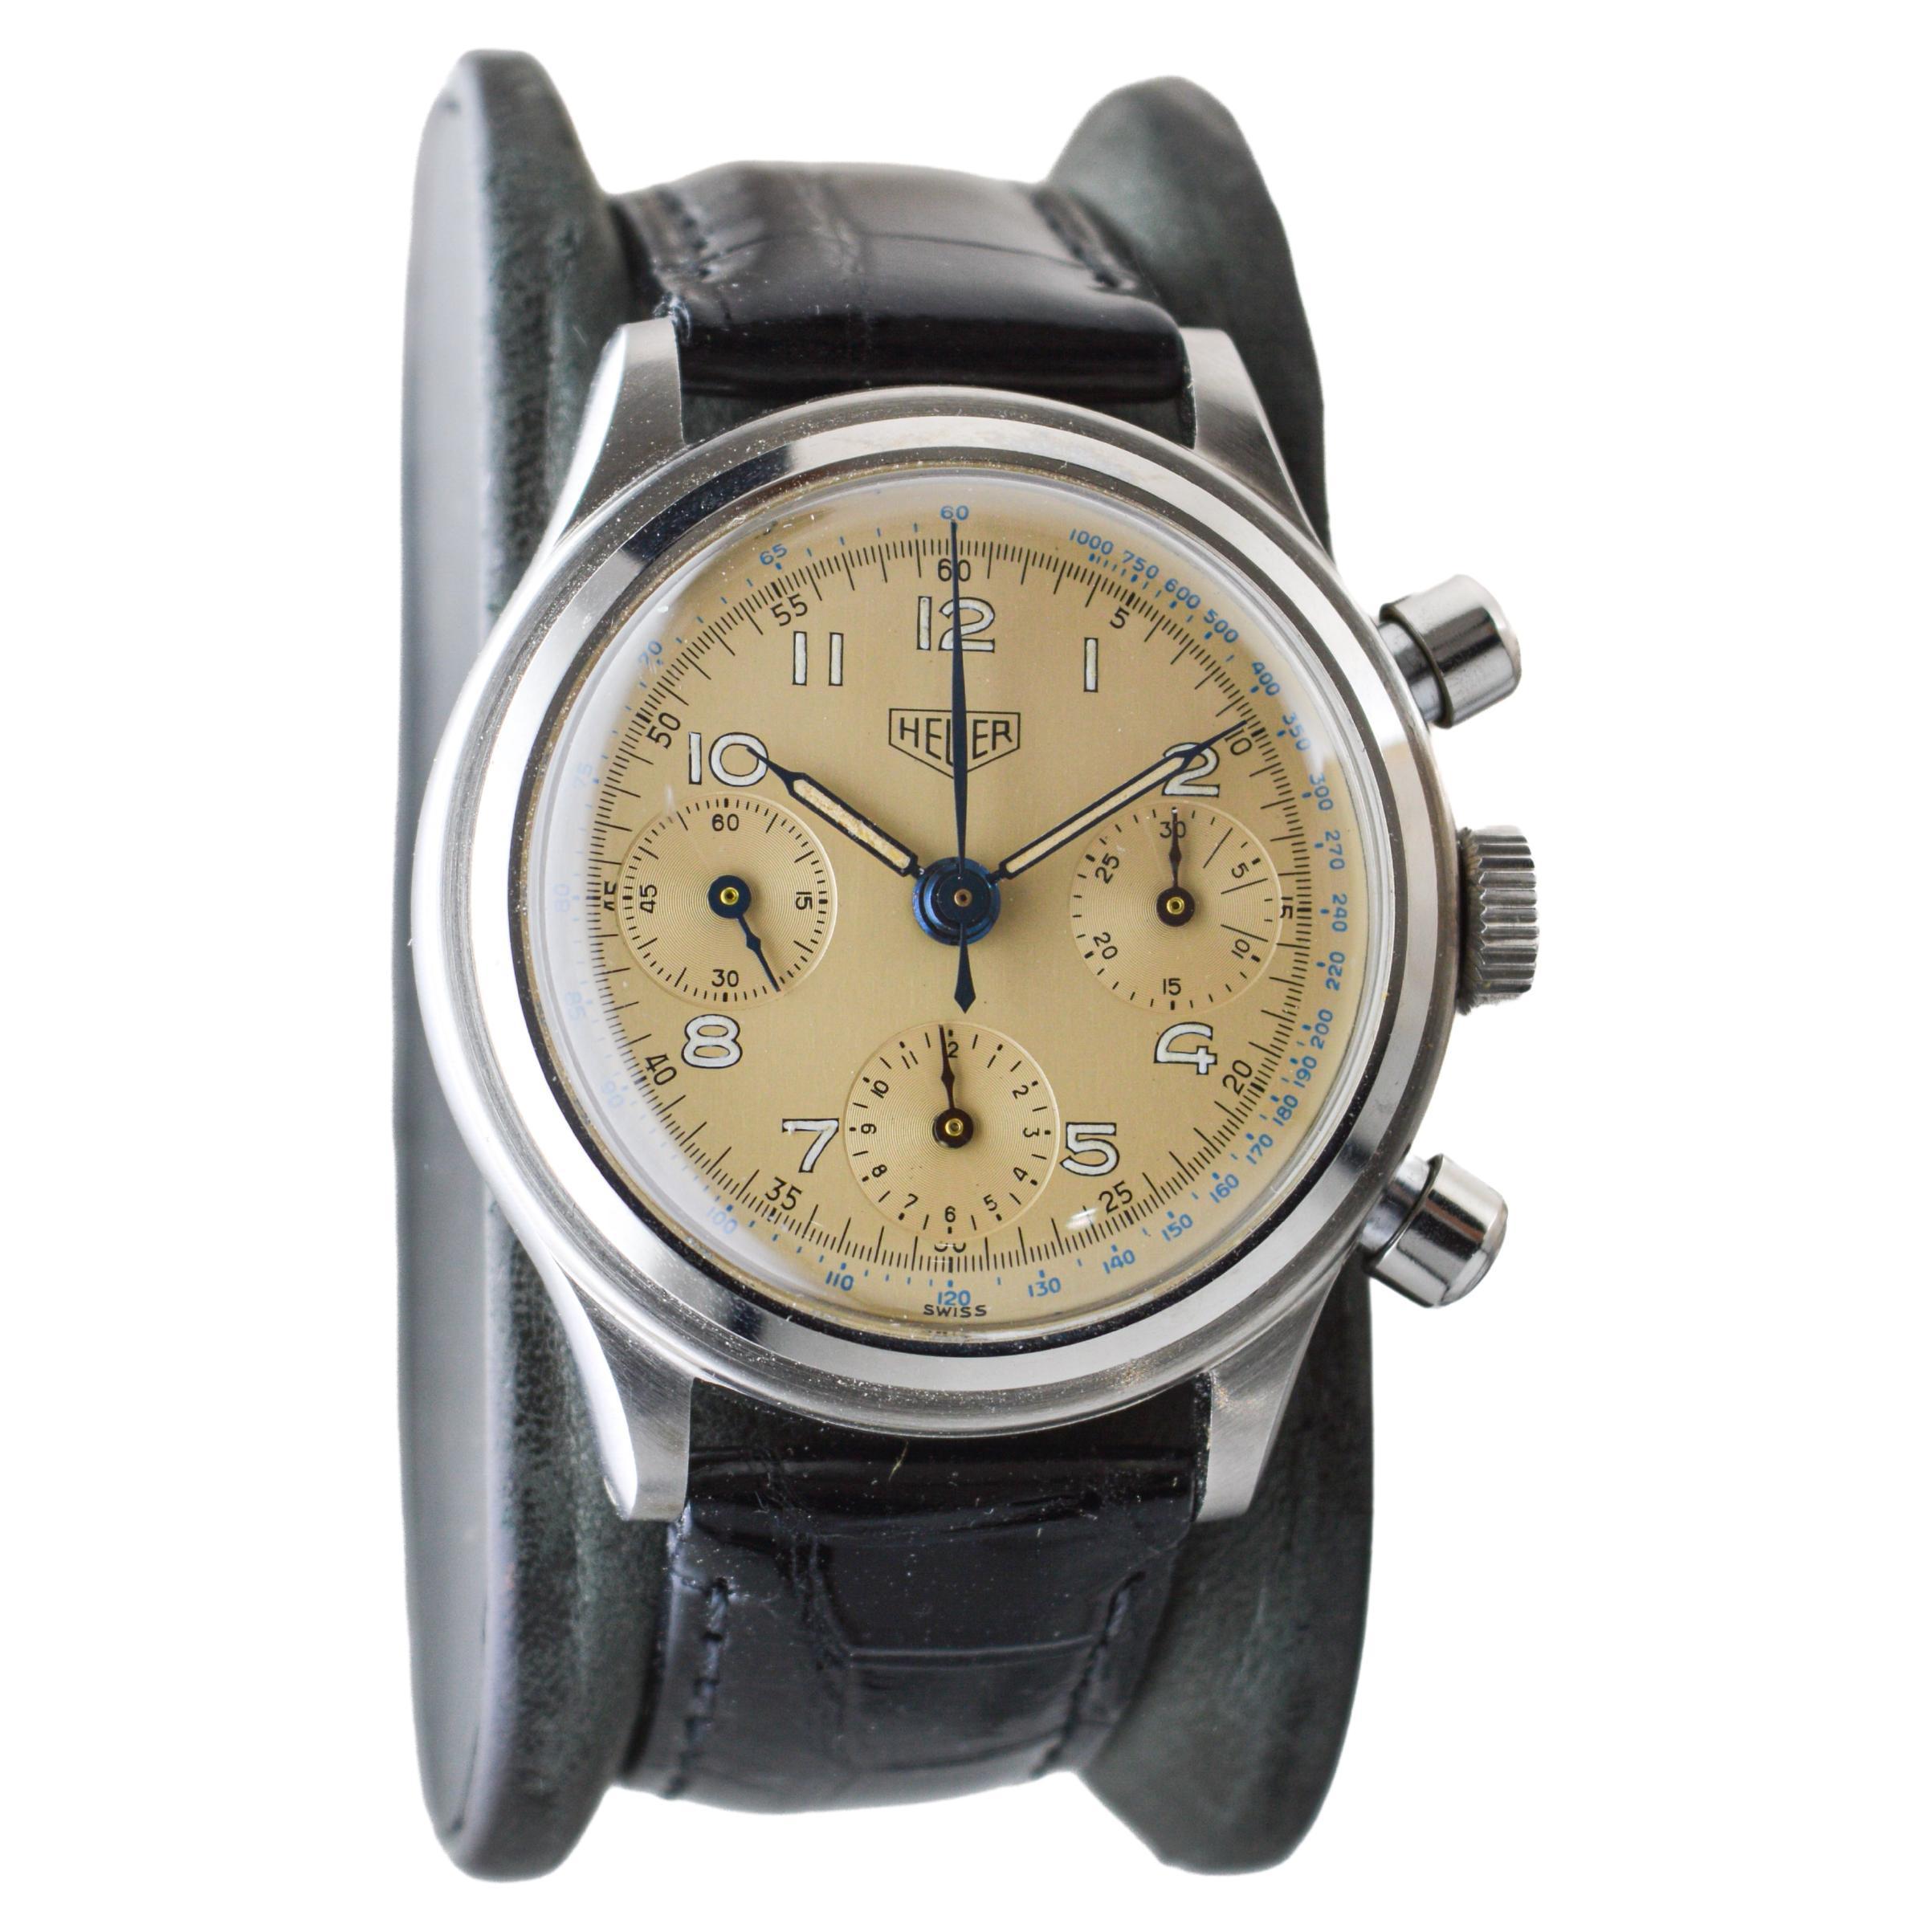 FACTORY / HOUSE: Heuer Watch Company
STYLE / REFERENCE: Three Register Chronograph
METAL / MATERIAL: Stainless Steel 
DIMENSIONS: Length 43mm X Diameter 37mm
CIRCA: 1950's
MOVEMENT / CALIBER: Manual Winding / 17 Jewels / Caliber Valjoux 726 
DIAL /